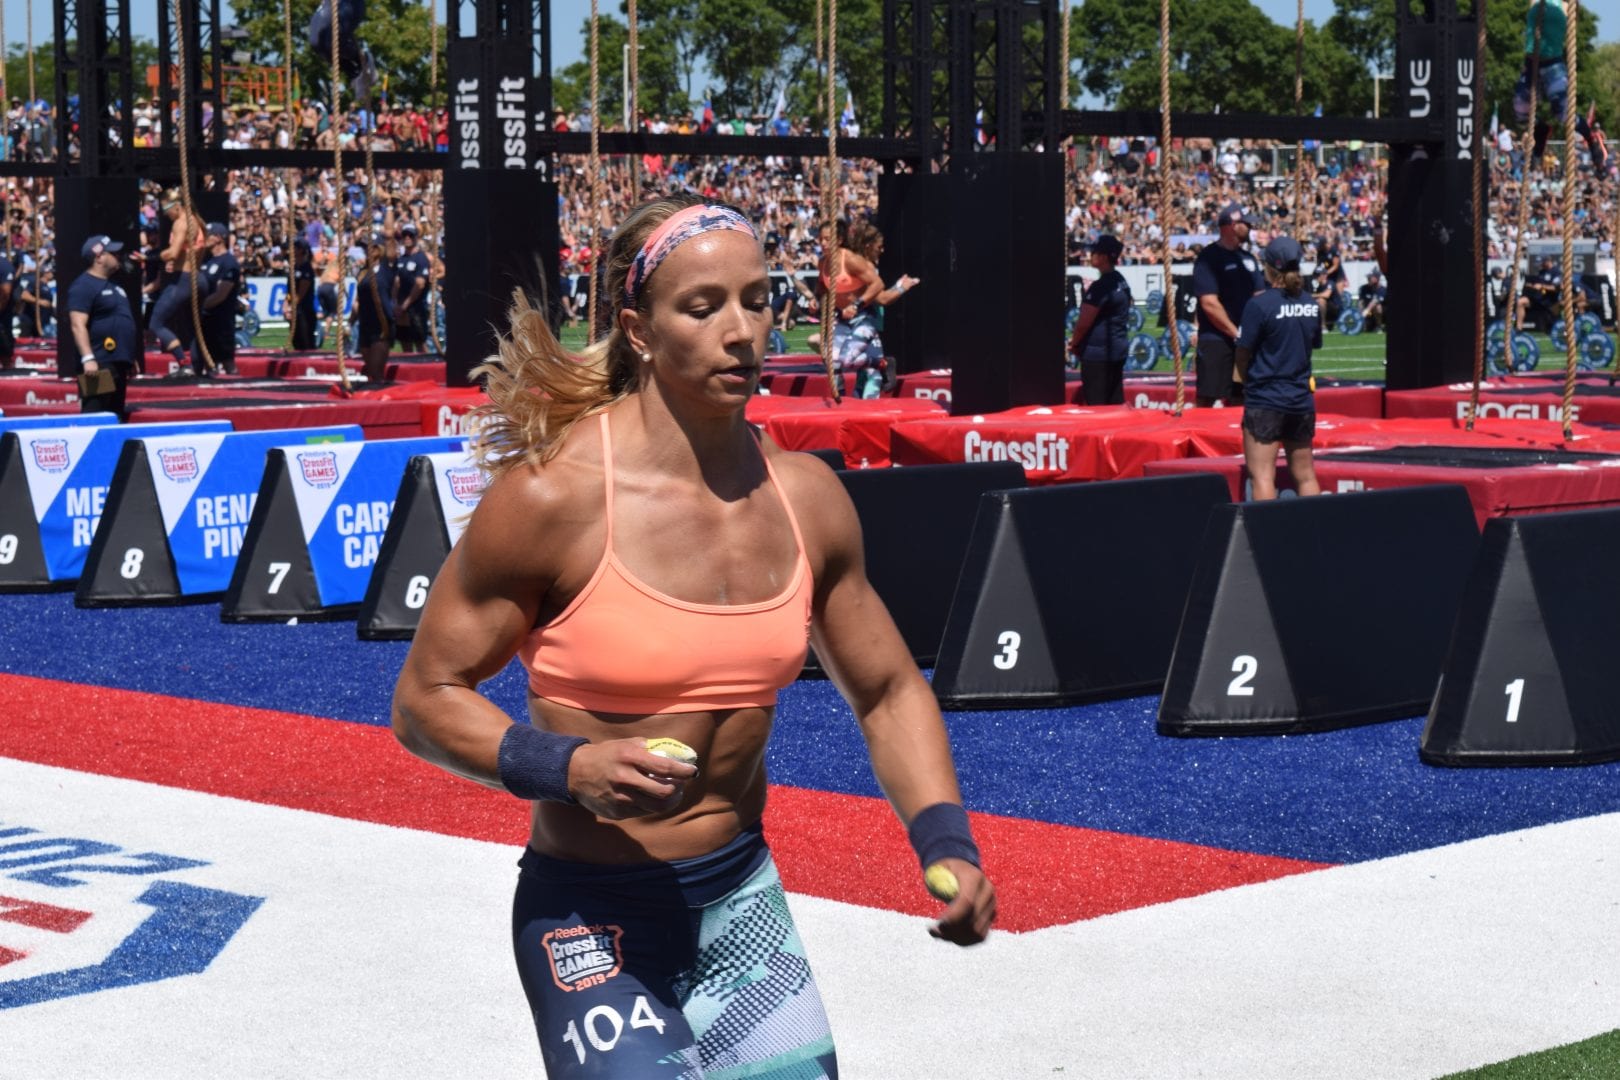 Amanda Barnhart heads out for a run before another round of legless rope climbs at the 2019 CrossFit Games